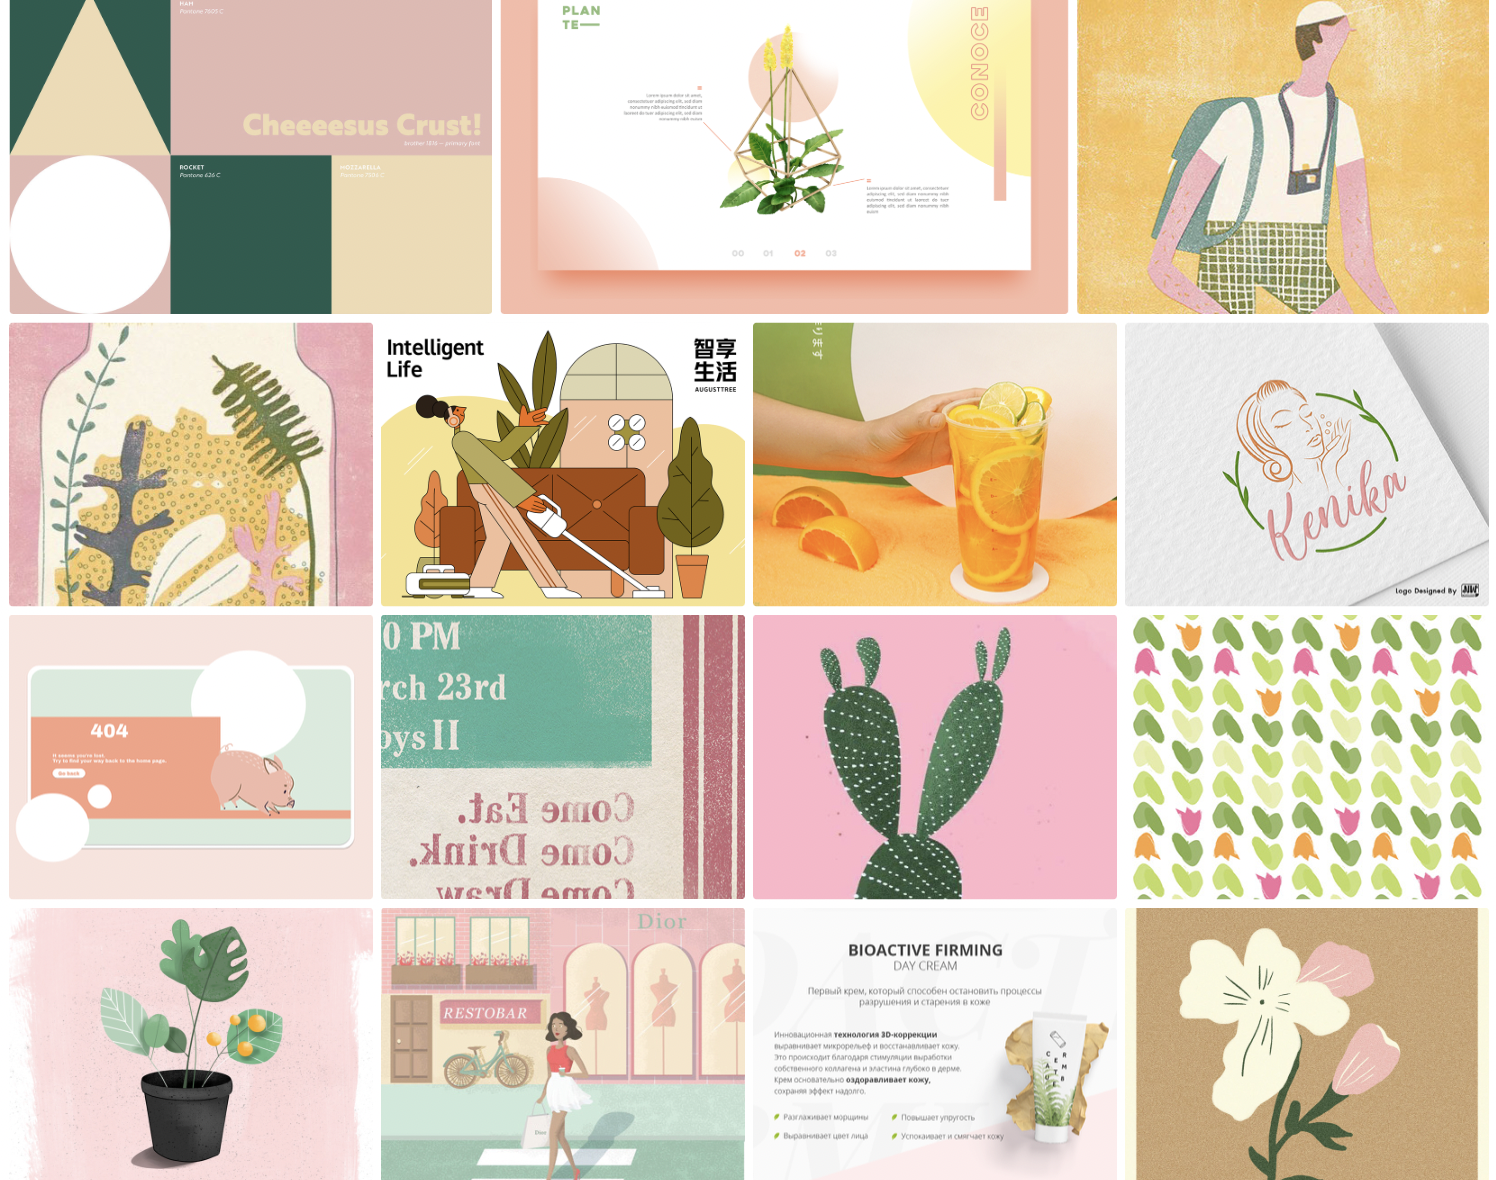 Mood board example with images, illustrations, text, photos in pastel orange and pink tones